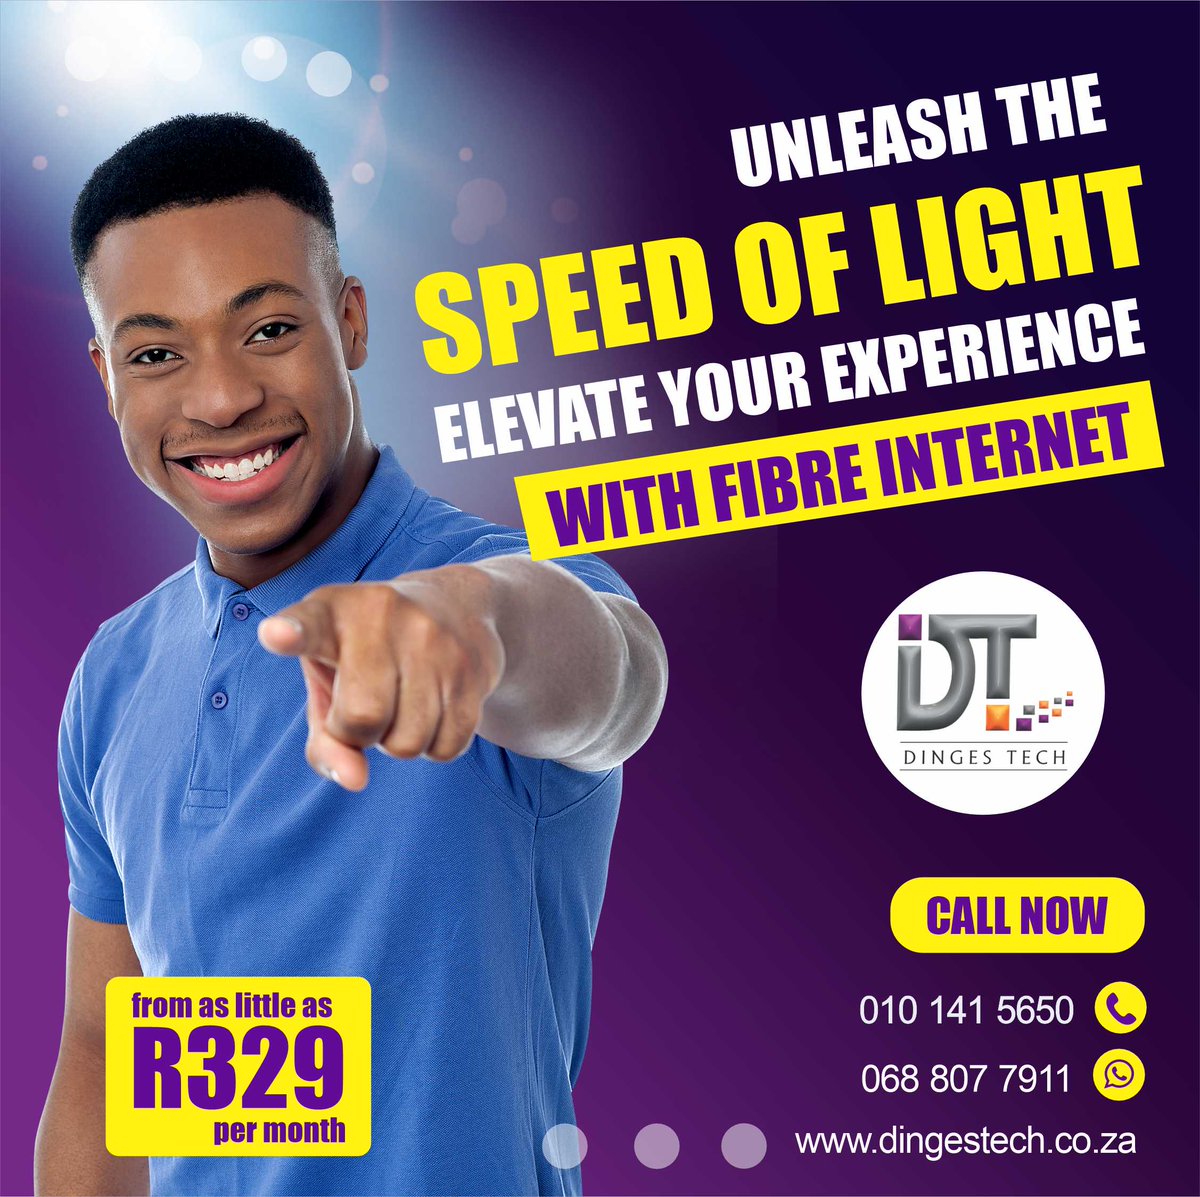 Discover Fiber Internet: The Need for Speed 🚀

Dinges Tech brings you Fiber Internet - the ultimate high-speed, reliable connectivity solution.

Internet Almost Anywhere
Website: dingestech.co.za

#FiberInternet #InternetSpeed #FiberConnectivity #InternetUpgrade #Fiber